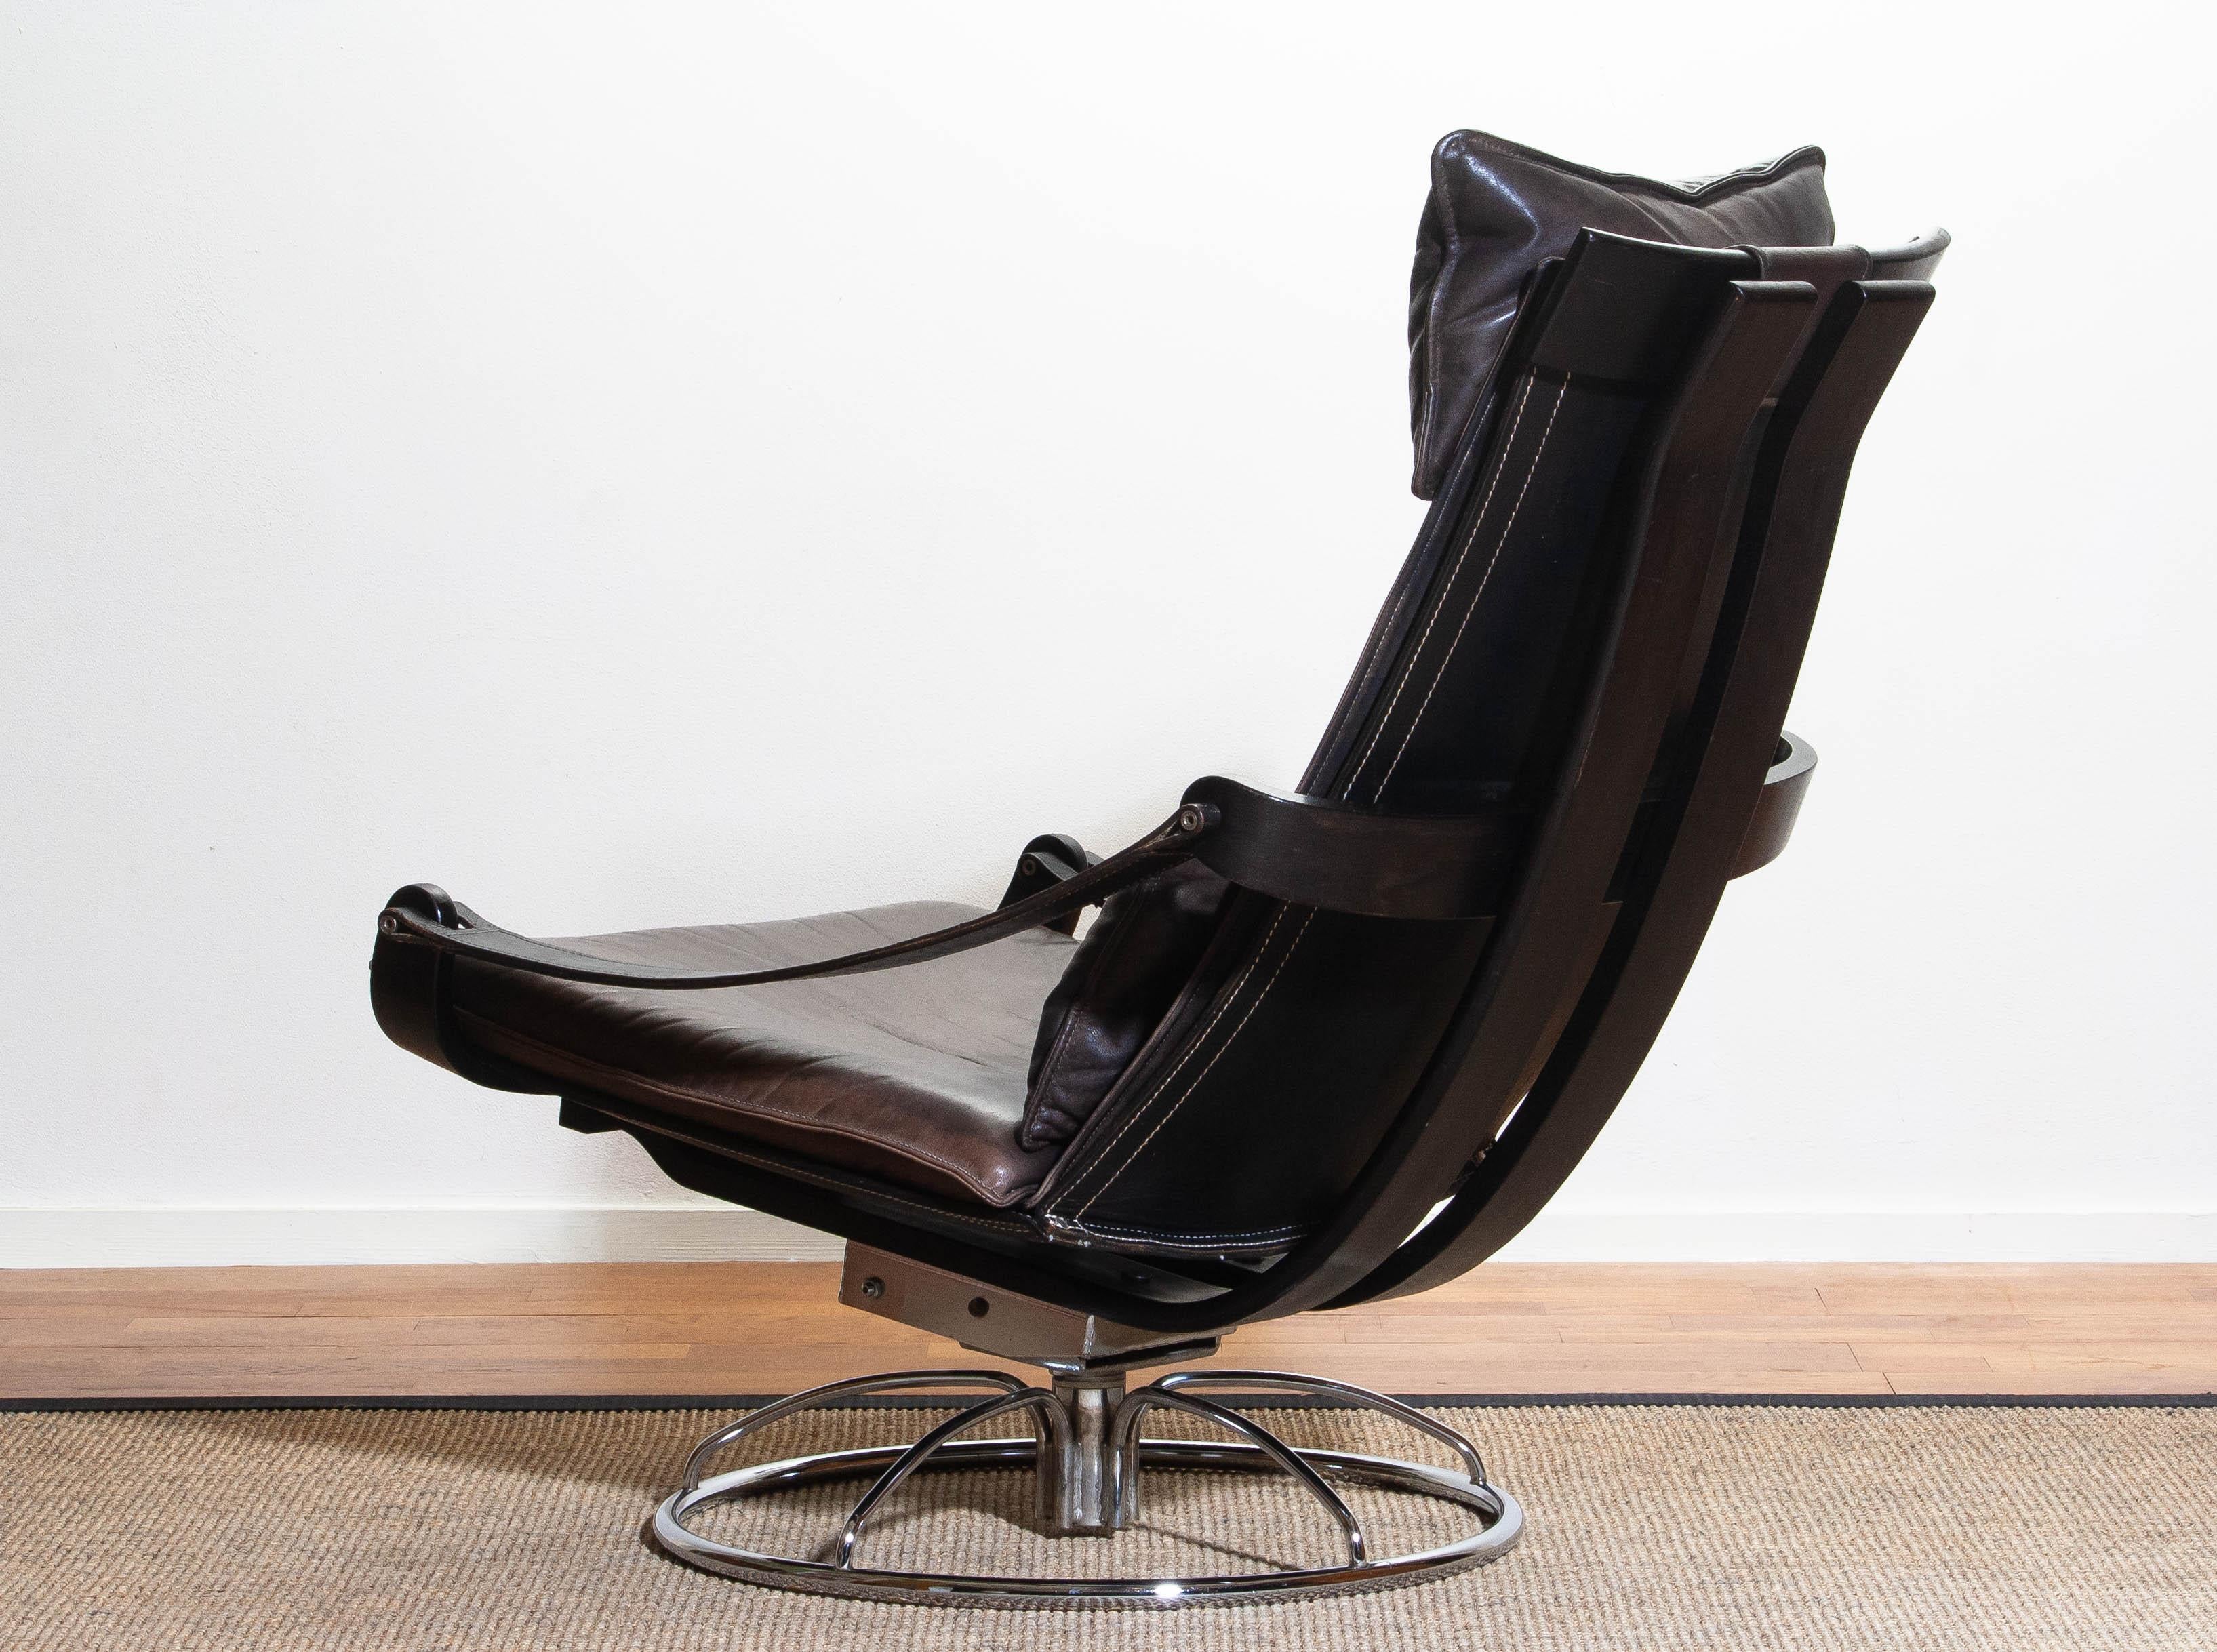 1970s Artistic Leather Swivel or Relax Chair by Ake Fribytter for Nelo, Sweden 3